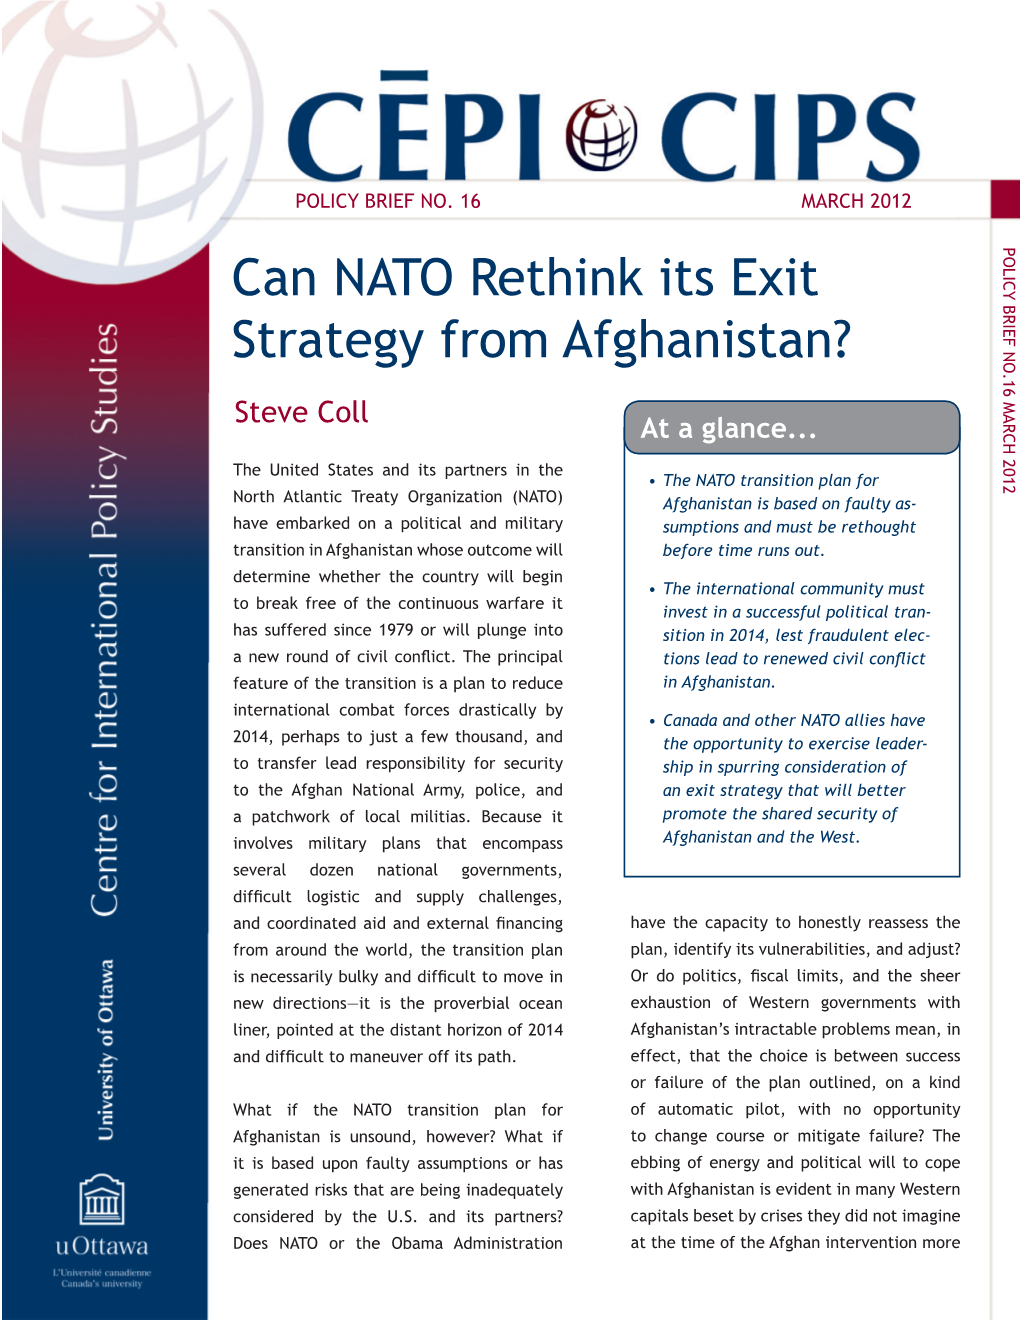 Can NATO Rethink Its Exit Strategy from Afghanistan?